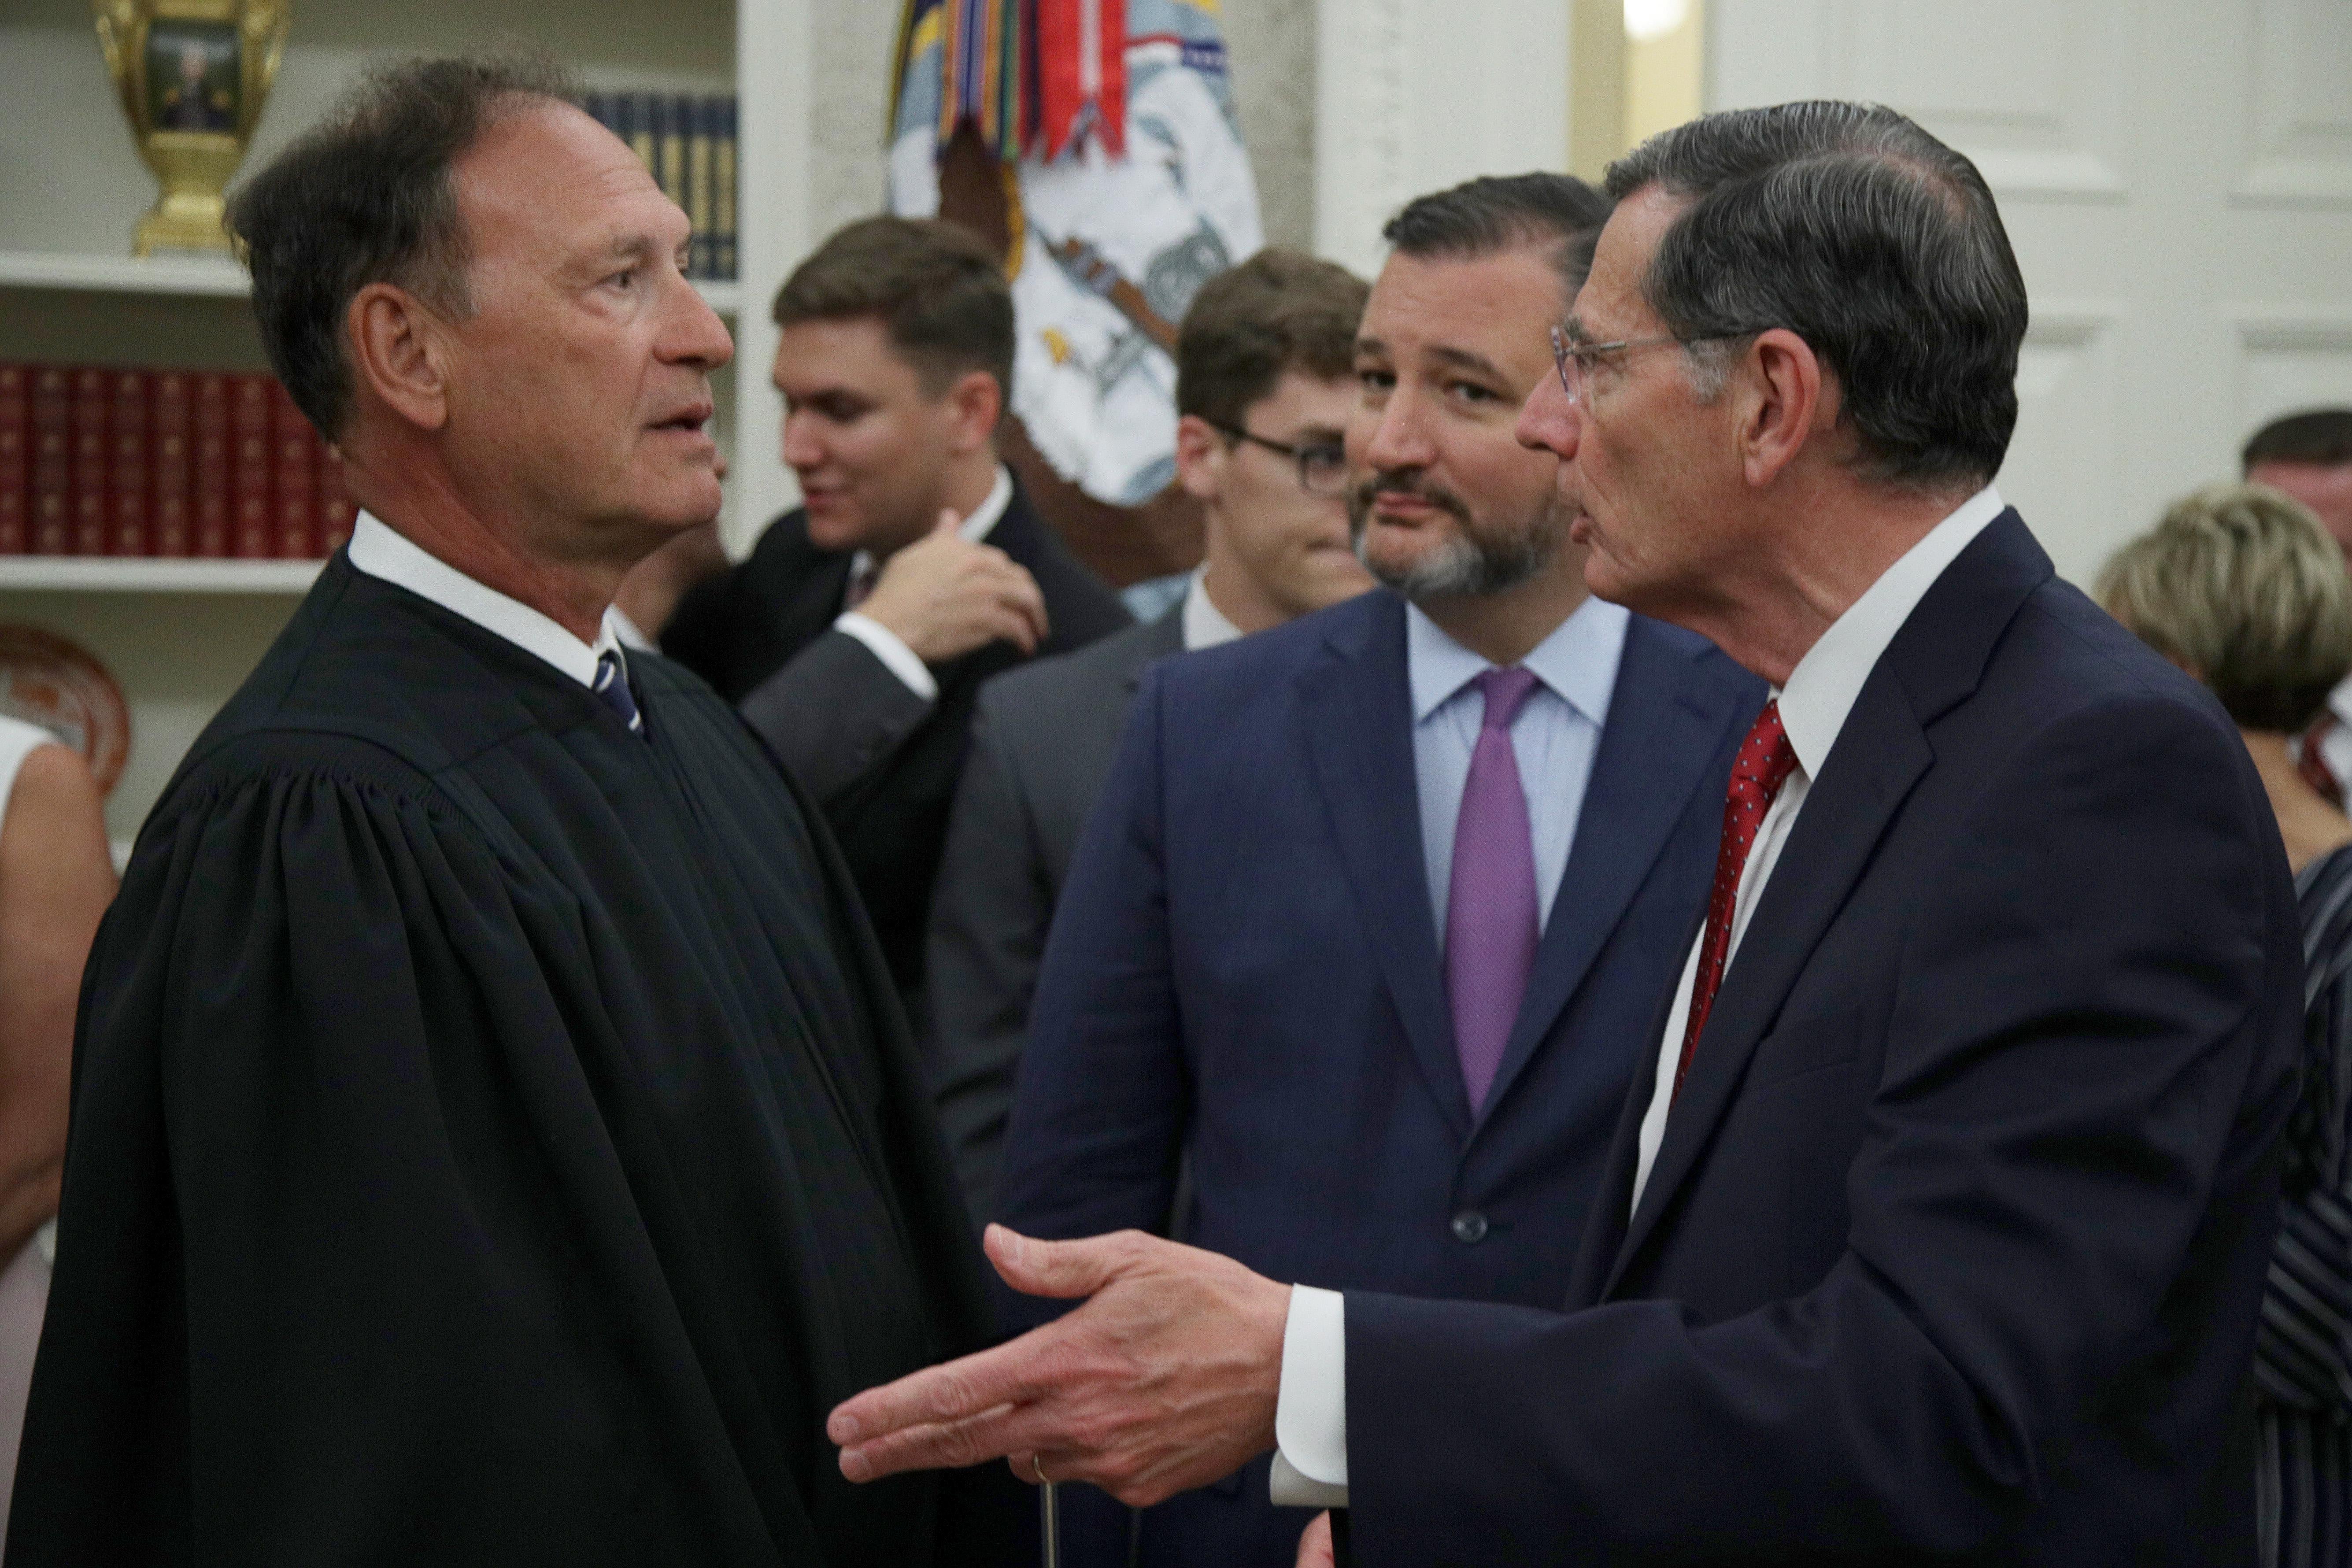 Alito in his robes standing among people mingling in the Oval Office